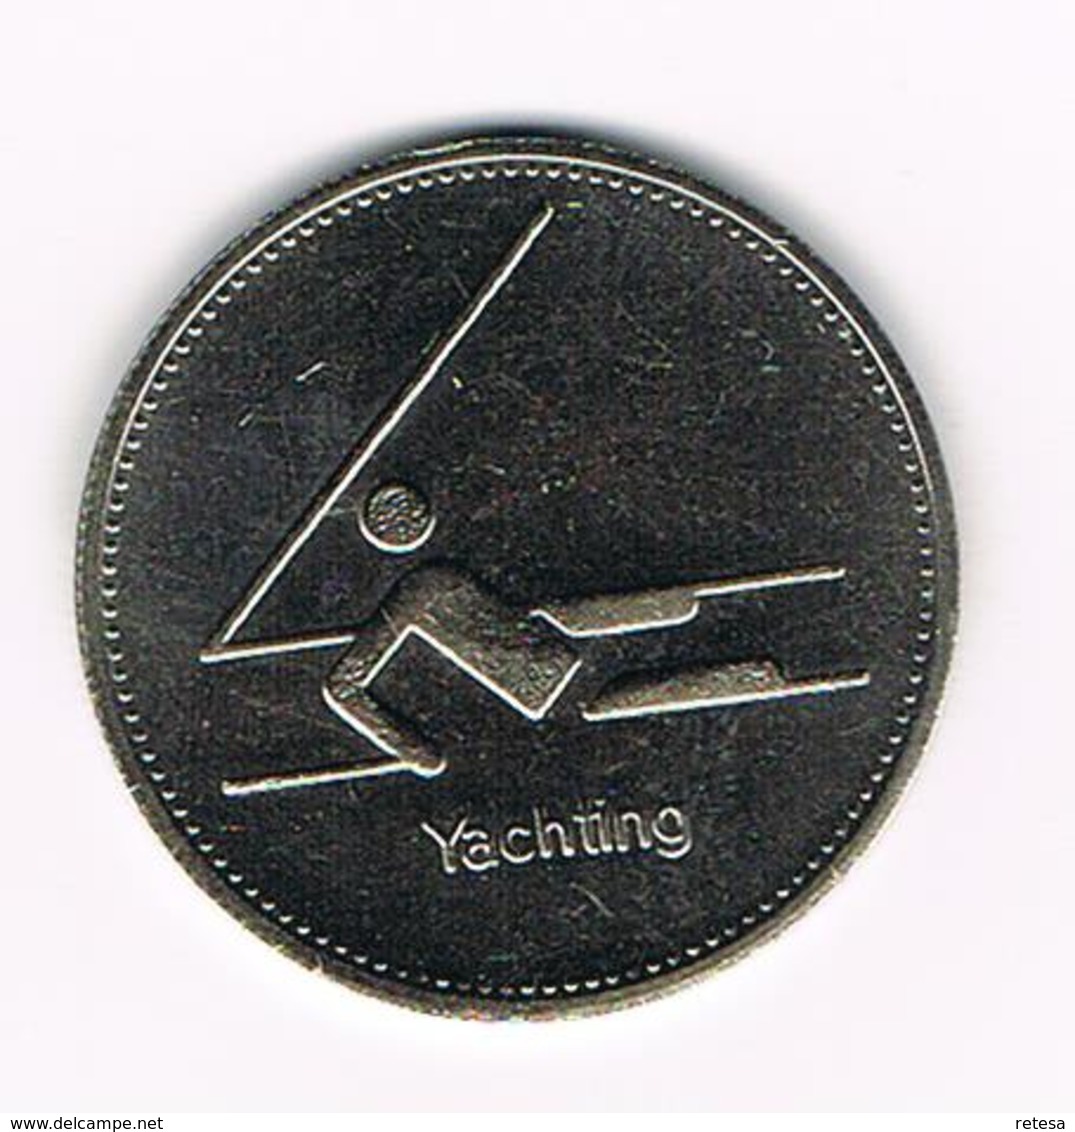 &  PENNING OLYMPIC TRUST OF CANADA  YACHTING 1980 - Pièces écrasées (Elongated Coins)